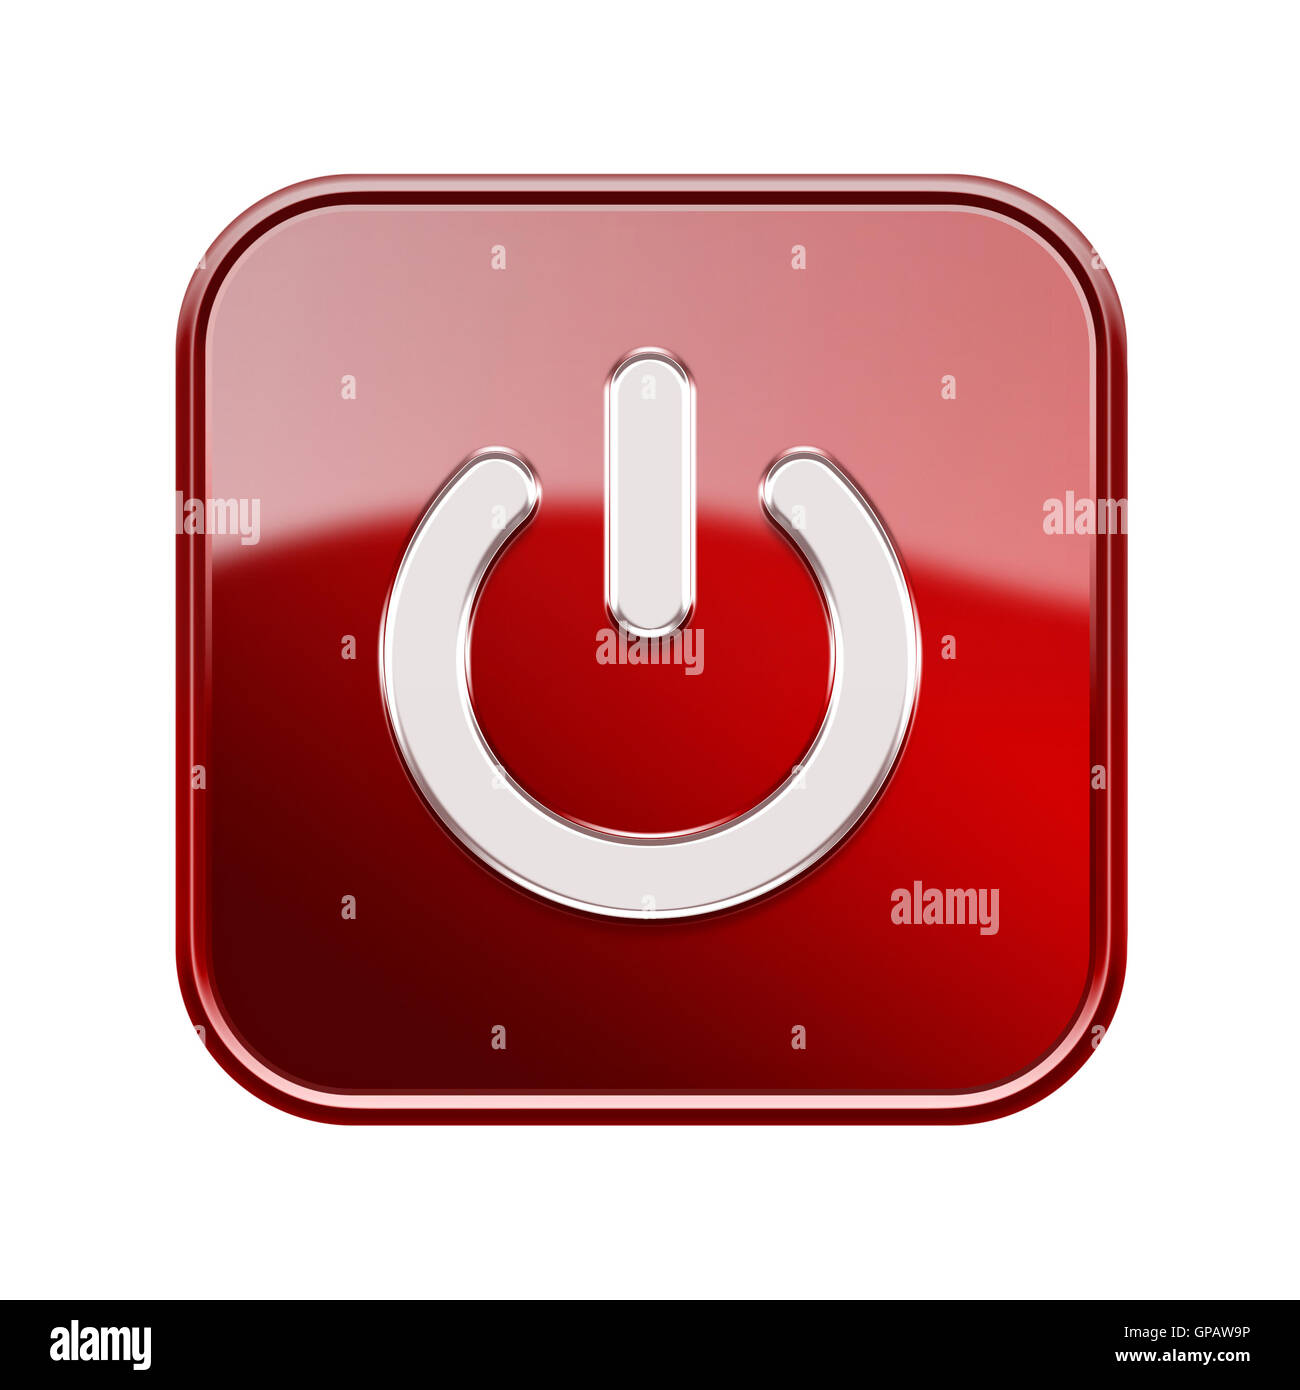 Power button icon red, isolated on white background Stock Photo